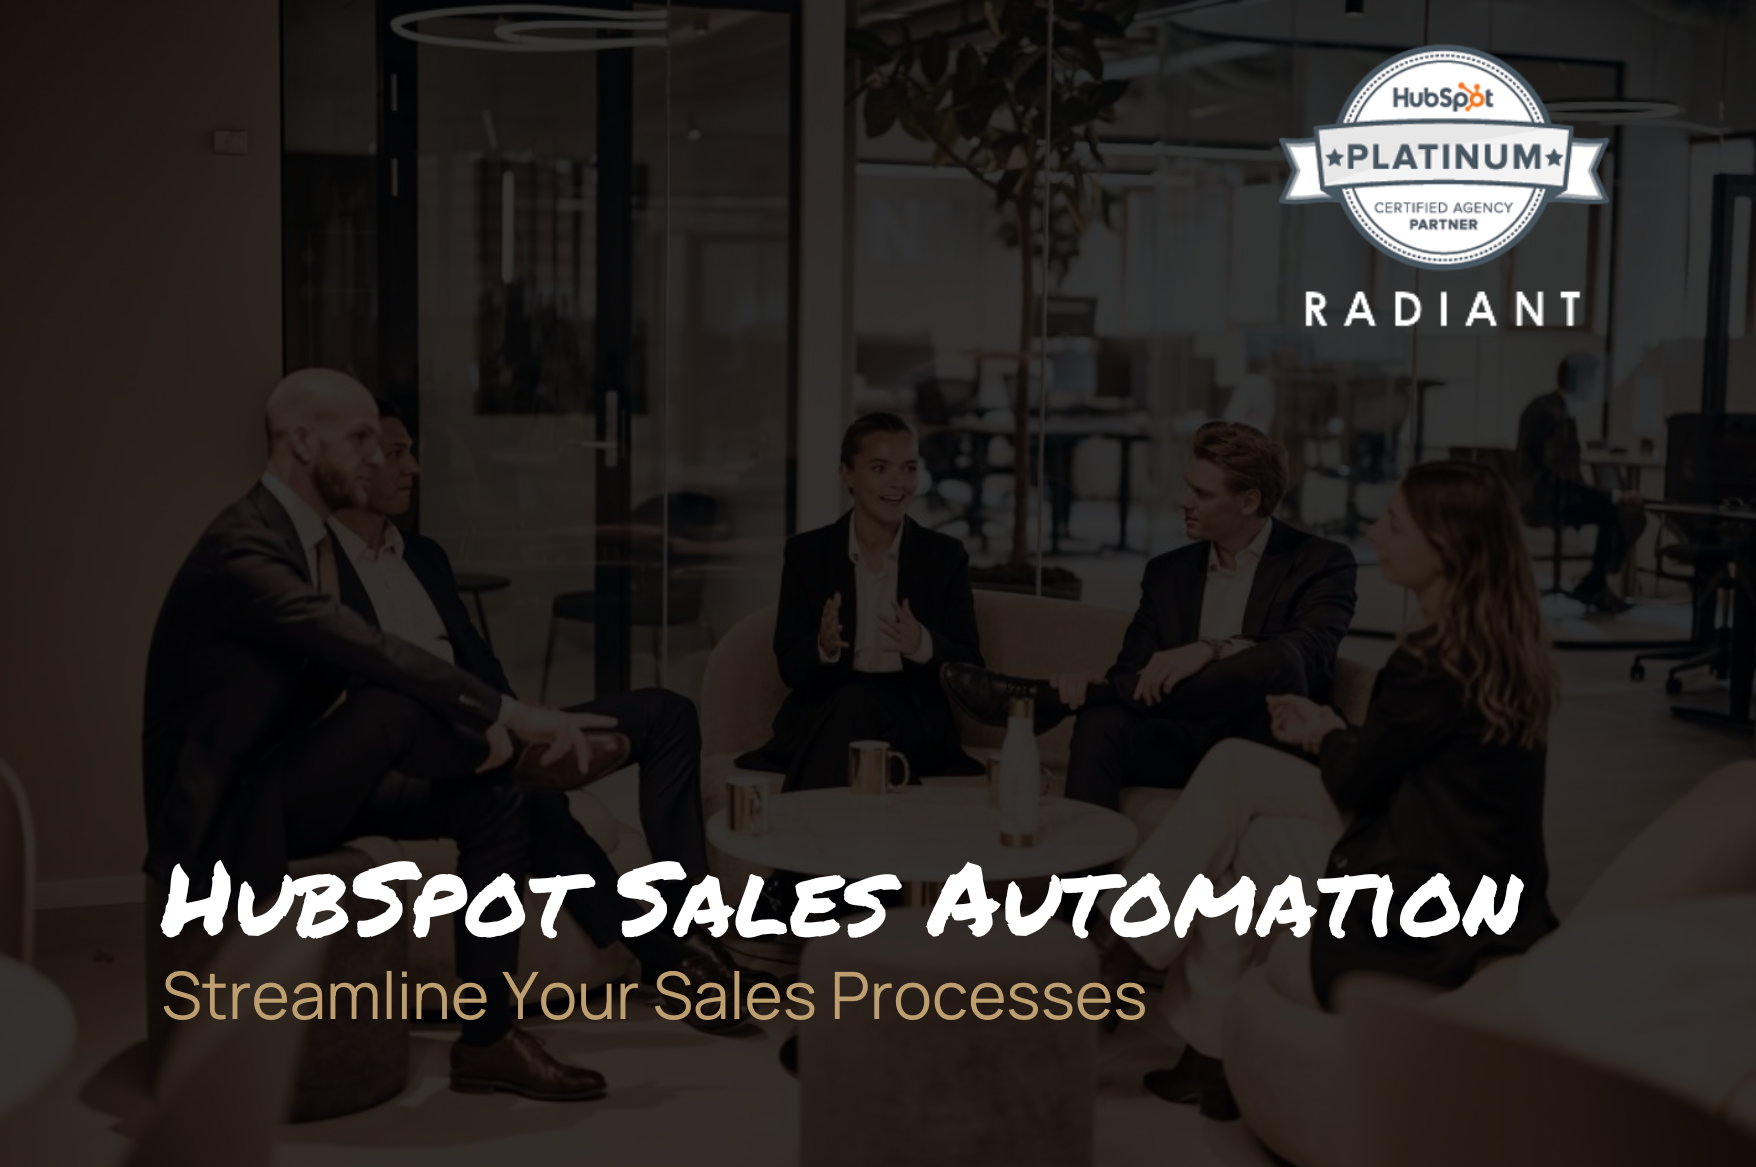 HubSpot Sales Automation – Automate and Streamline Your Sales Processes